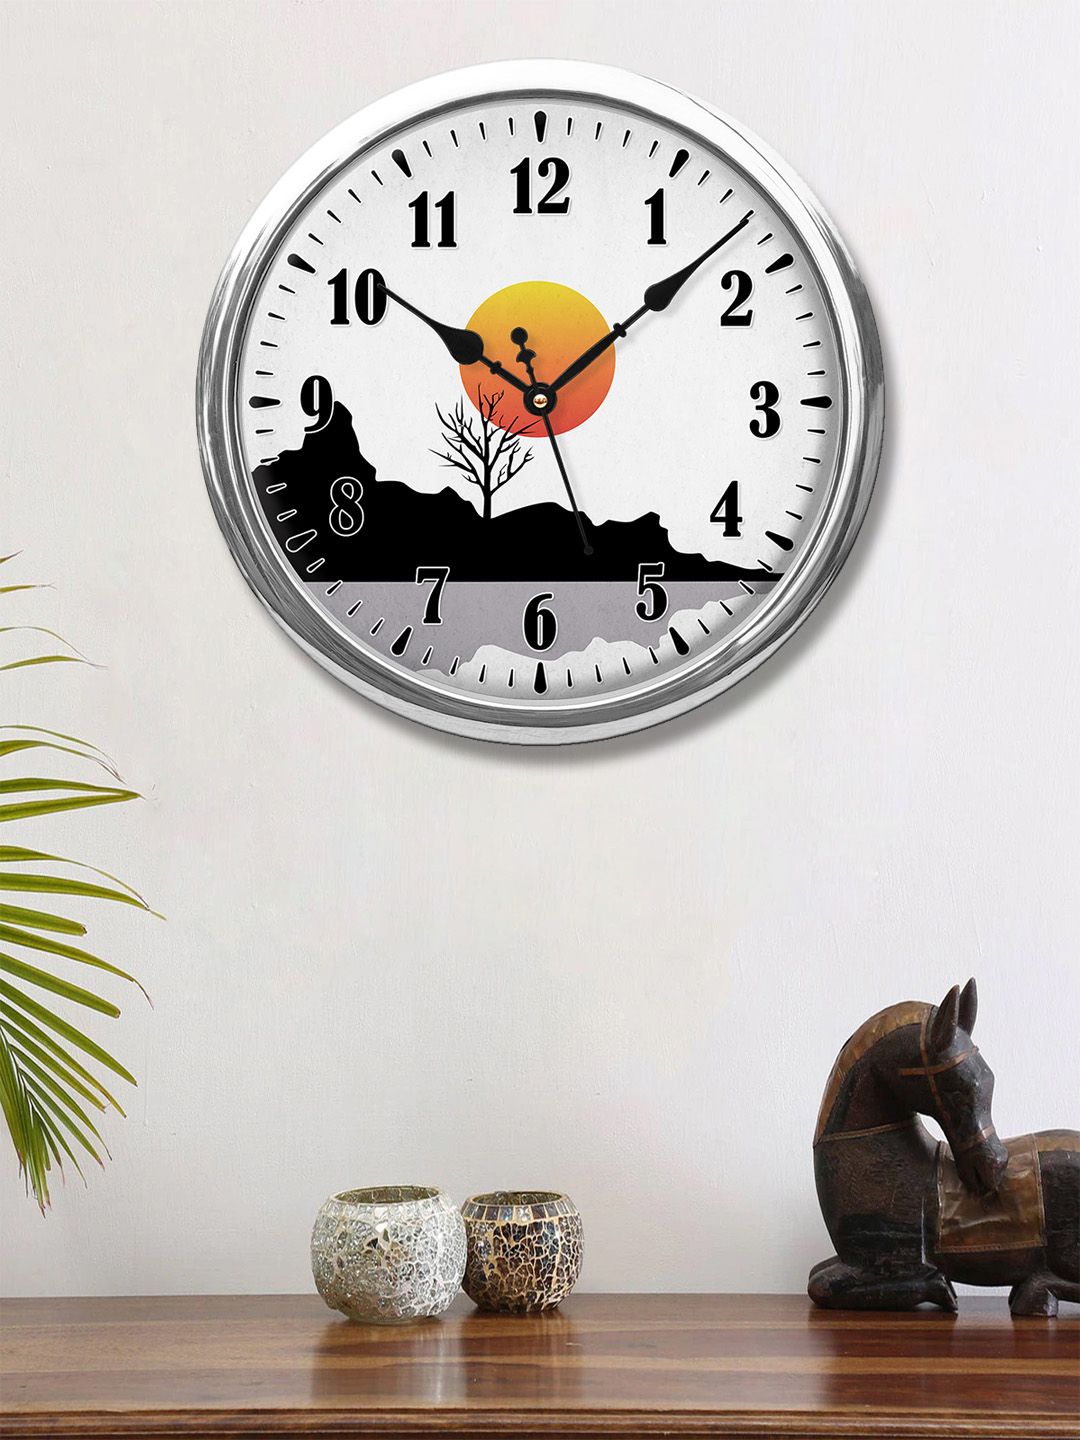 999Store White Round Sunset Mountains Printed Analogue Wall Clock Price in India